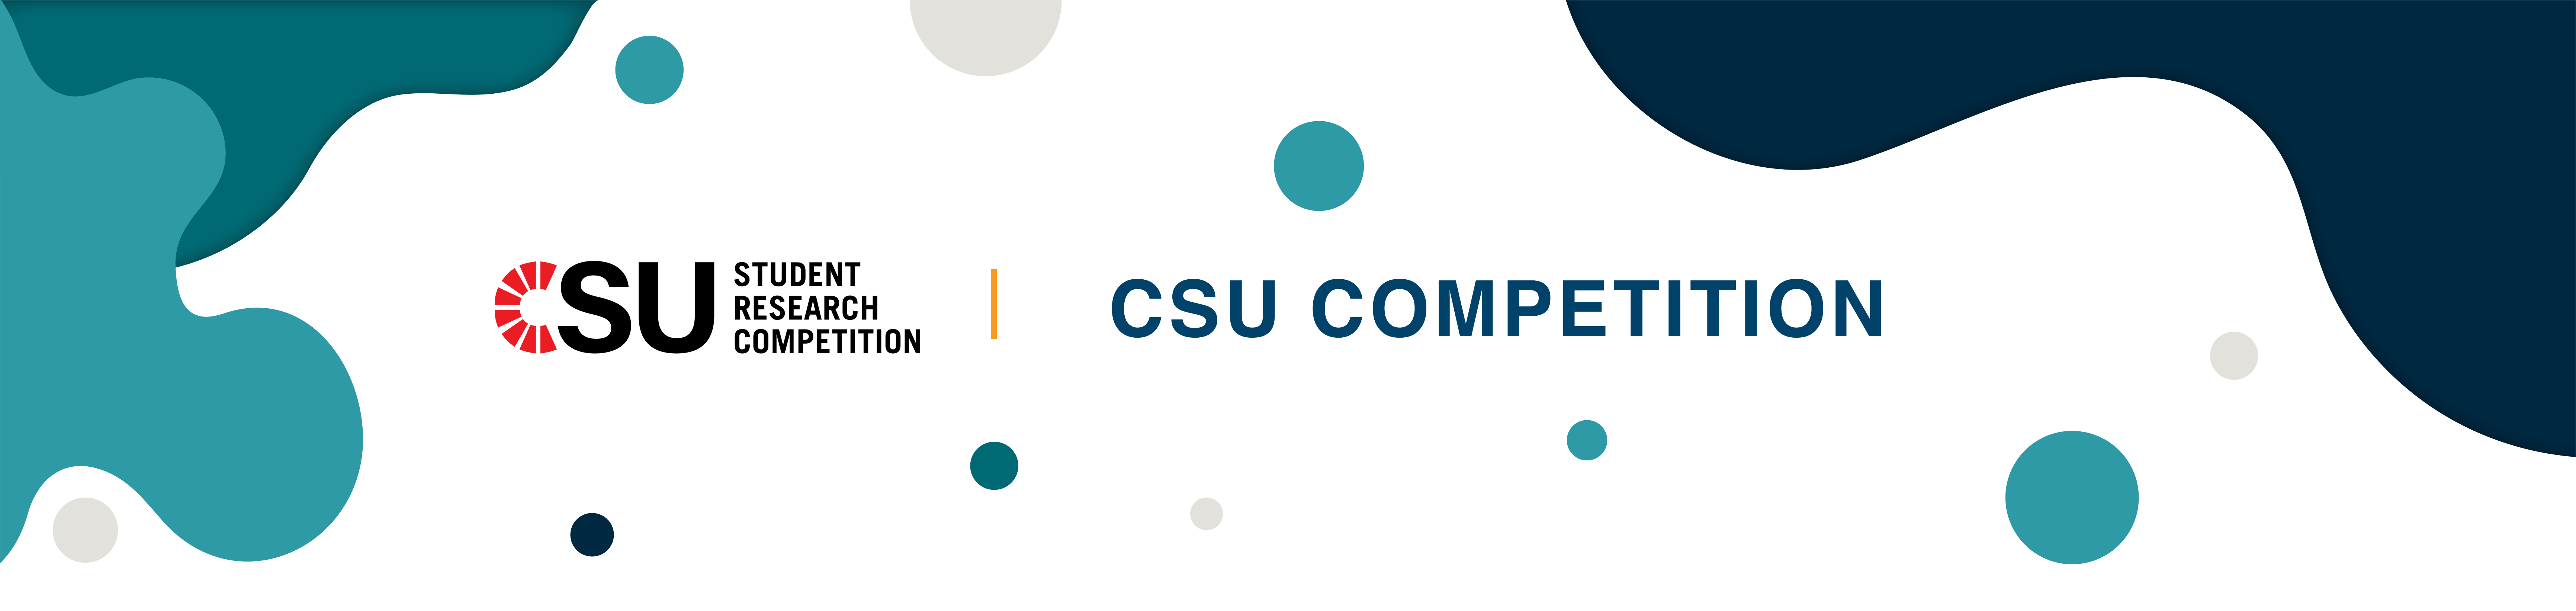 CSU Student Research Competition